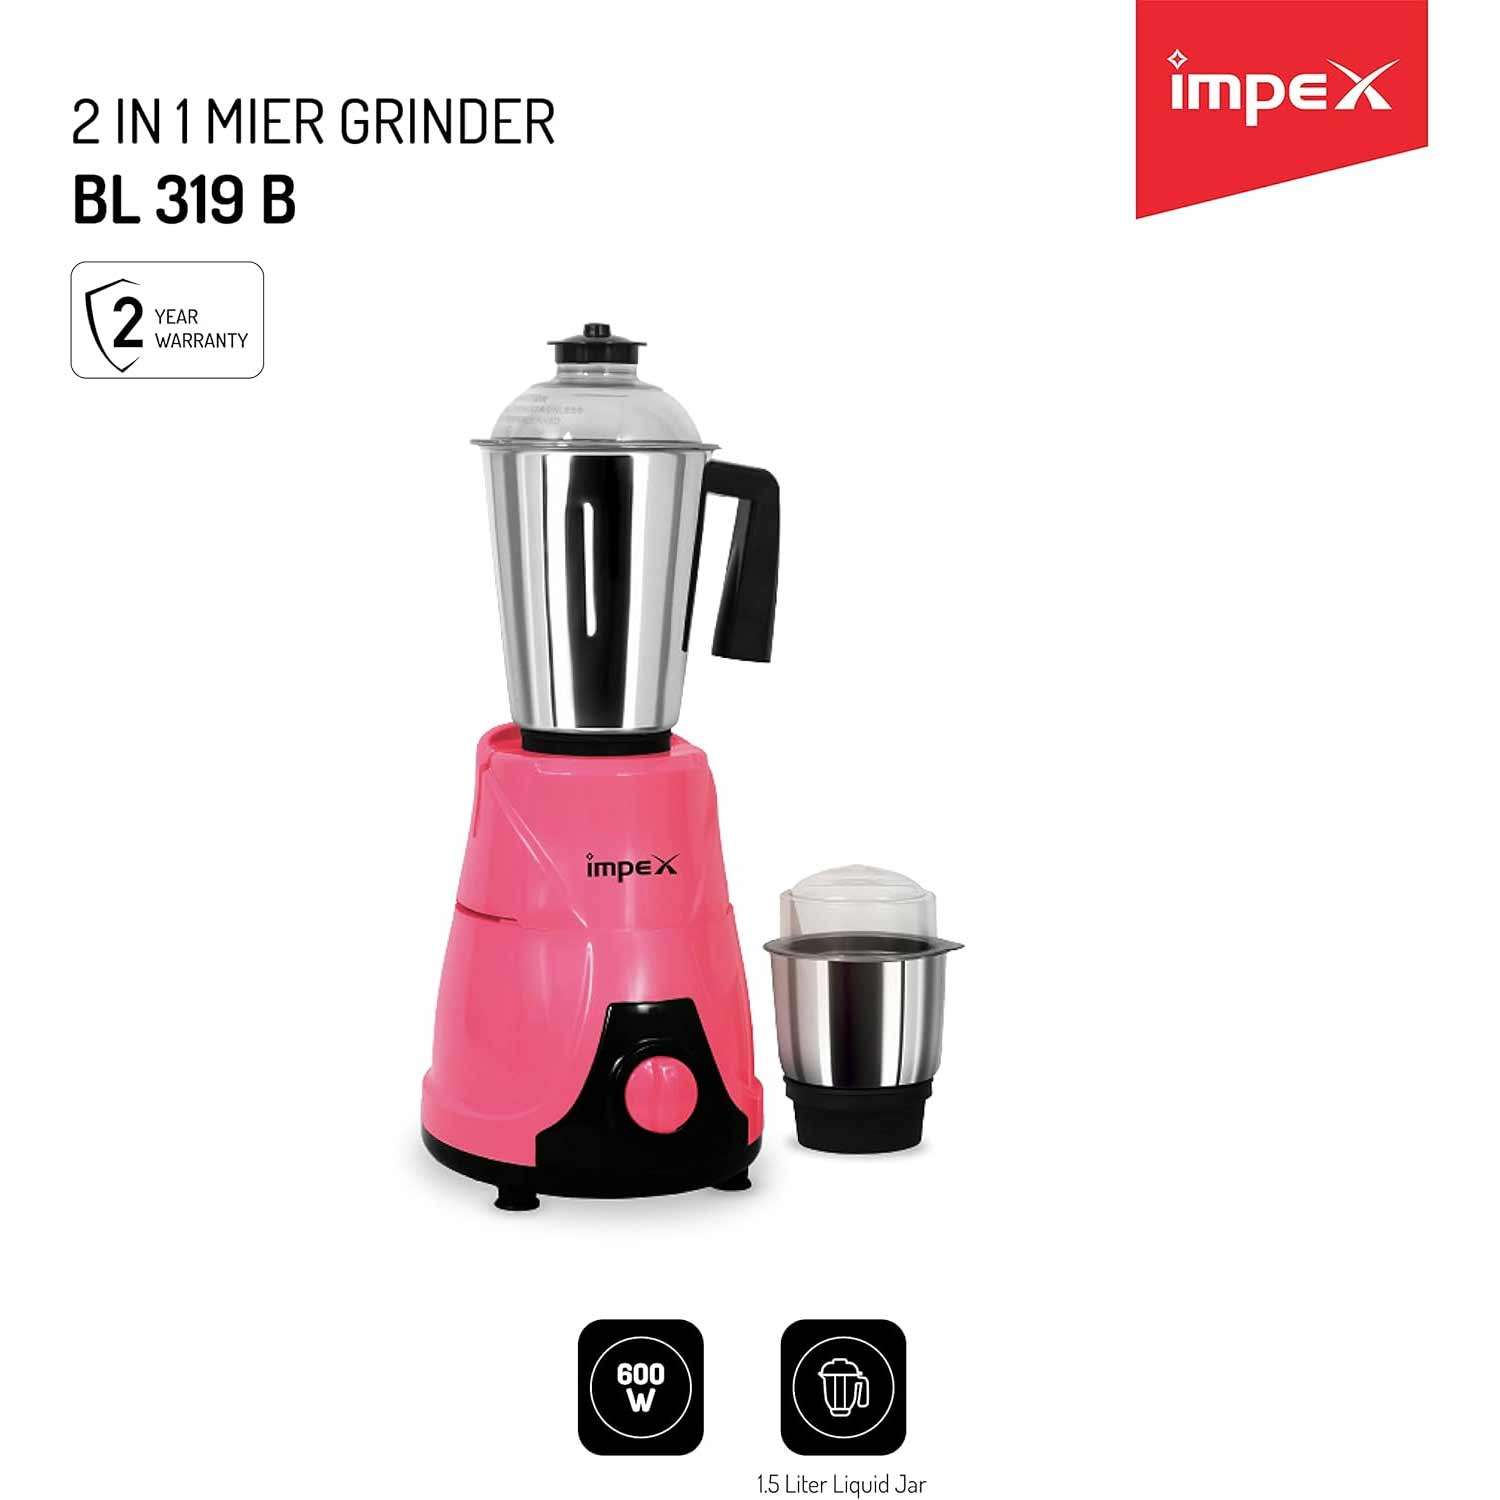 Impex ULTRAMIXX 600  1.5 Litre 3 Speed Control Blender 2 in 1 Mixer Grinder with Stainless Steel Blade|Jar ABS Strong Body with Overload Protection (Multicolor)